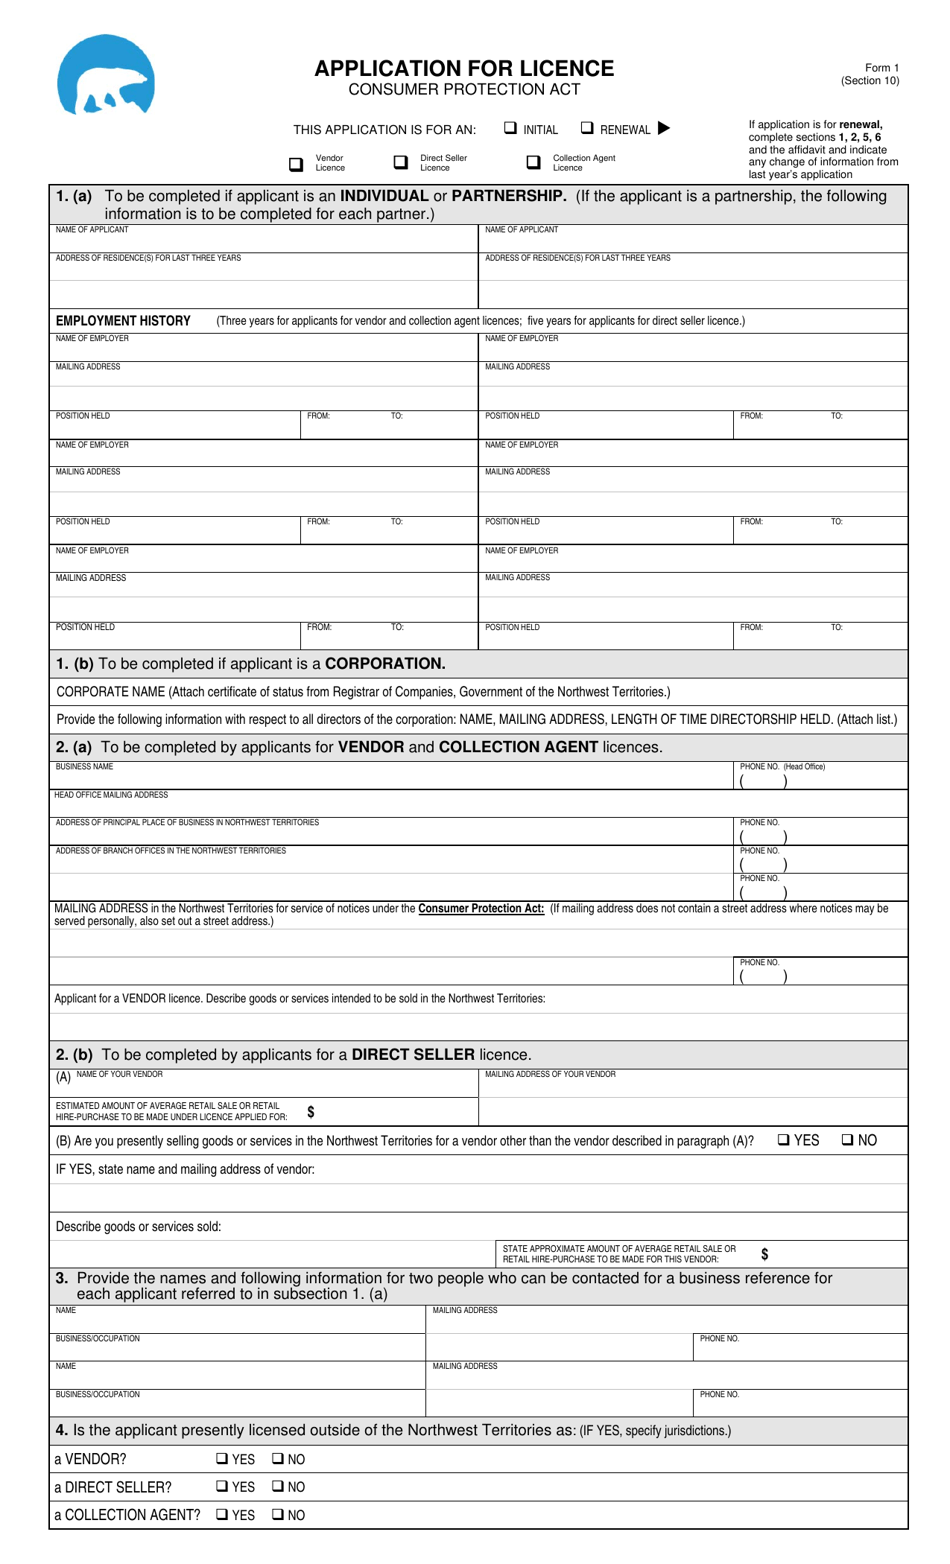 Form 1 Application for Licence - Consumer Protection Act - Northwest Territories, Canada, Page 1